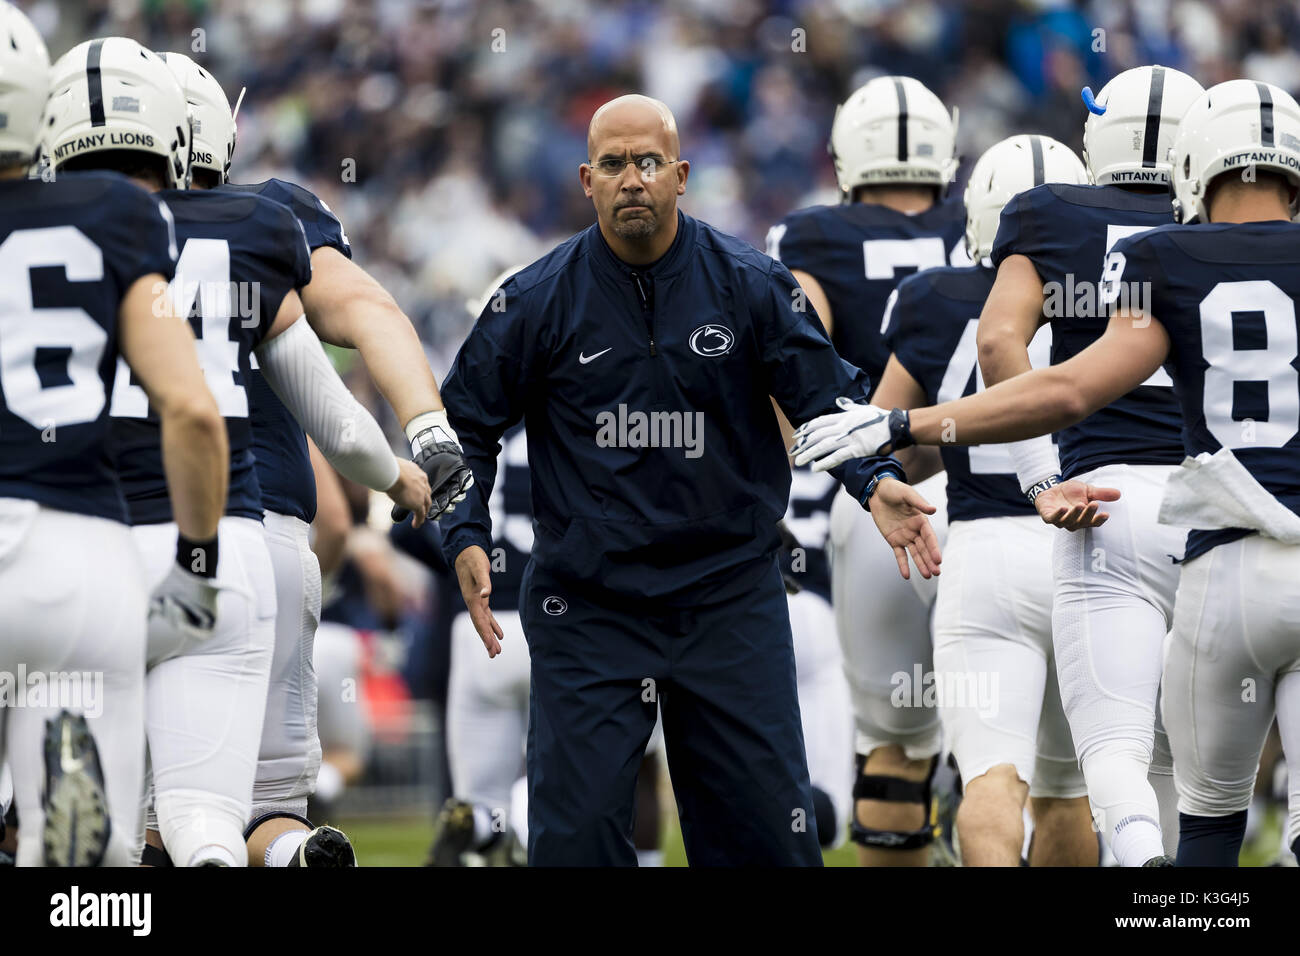 University Park, Pennsylvania, USA. 2nd Sep, 2017. September 02, 2017: Penn State Nittany Lions head coach James Franklin greets his players as they take the field during the NCAA football game between Penn State Nittany Lions and Akron Zips at Beaver Stadium in University Park, Pennsylvania. Credit: Scott Taetsch/ZUMA Wire/Alamy Live News Stock Photo